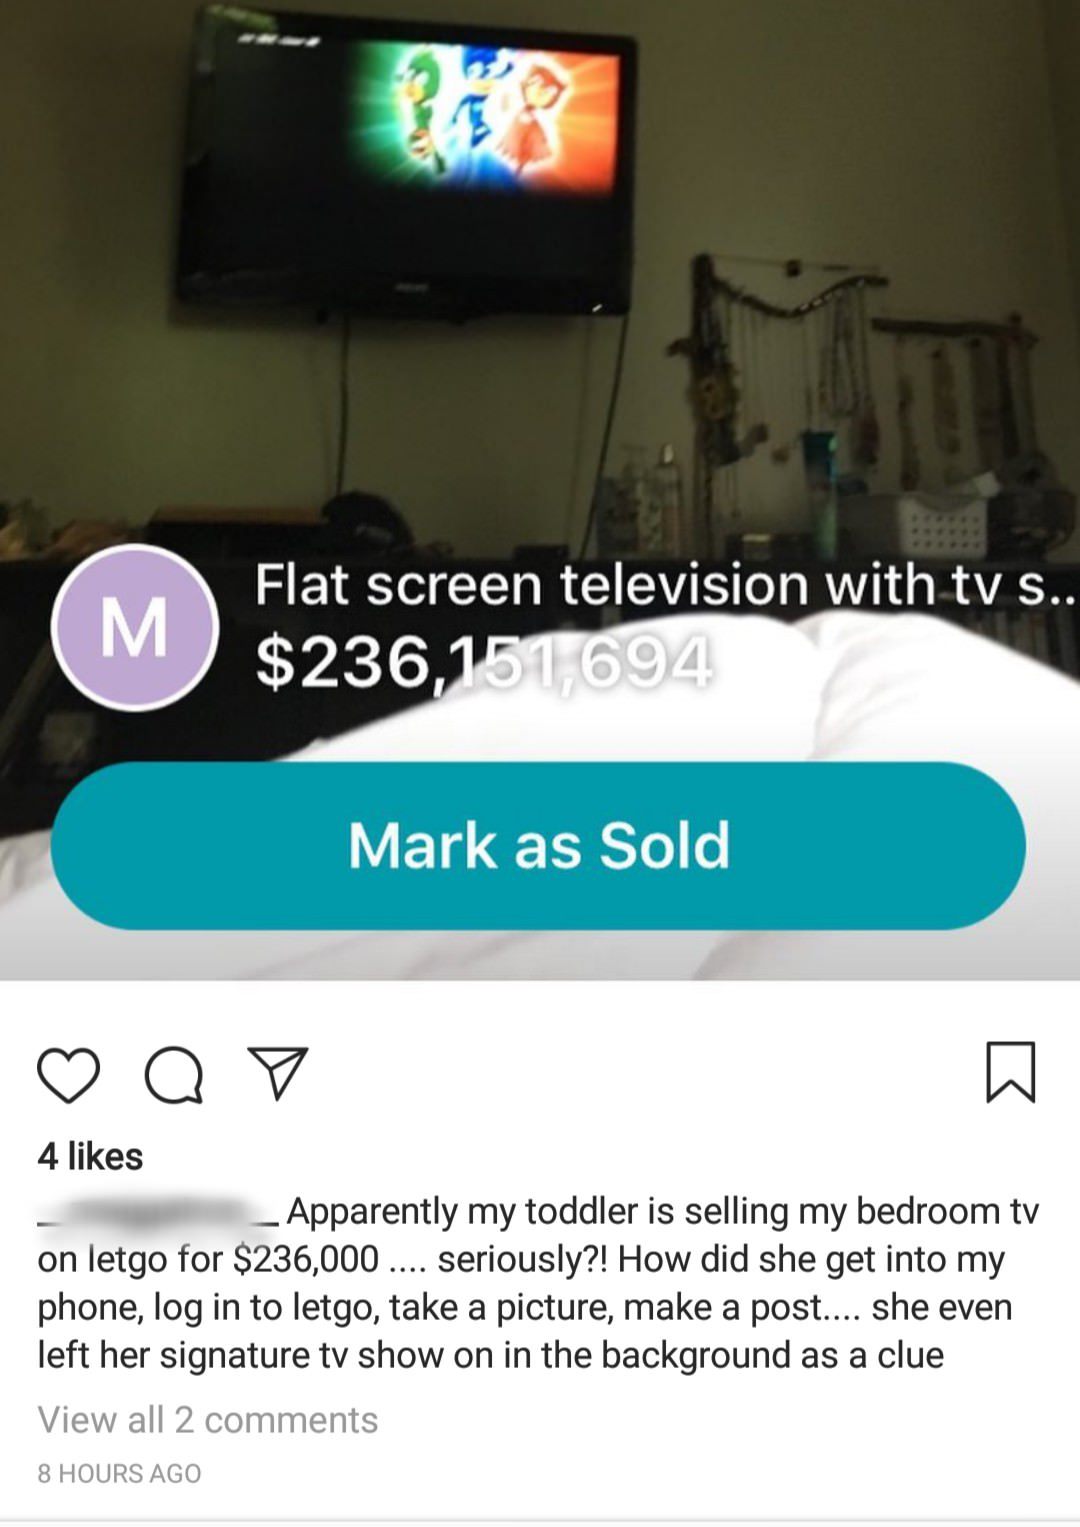 multimedia - M Flat screen television with tv S.. $236,151,694 Mark as Sold Q v 4 _ Apparently my toddler is selling my bedroom tv on letgo for $236,000 .... seriously?! How did she get into my phone, log in to letgo, take a picture, make a post.... She e